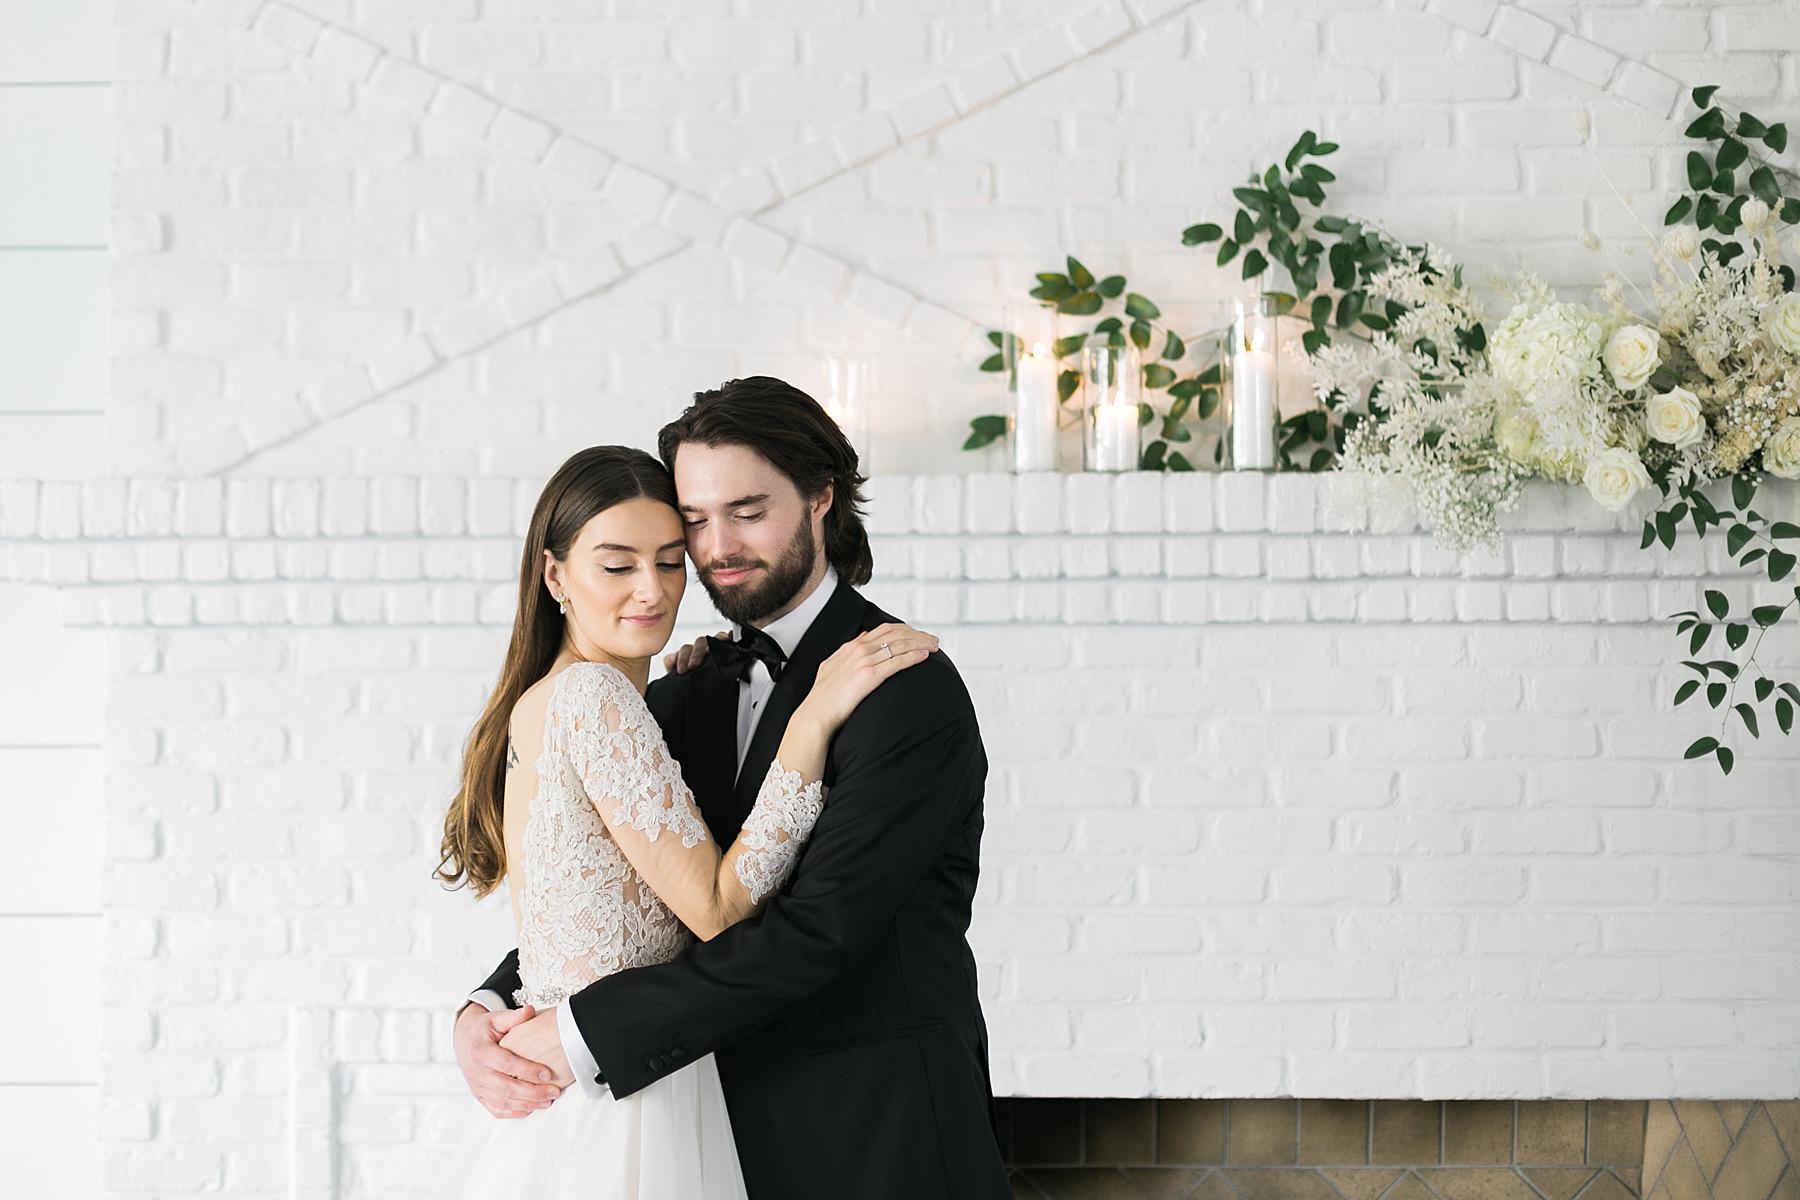 couple and boho flowers at hutton house white wedding venue in minneapolis minnesota